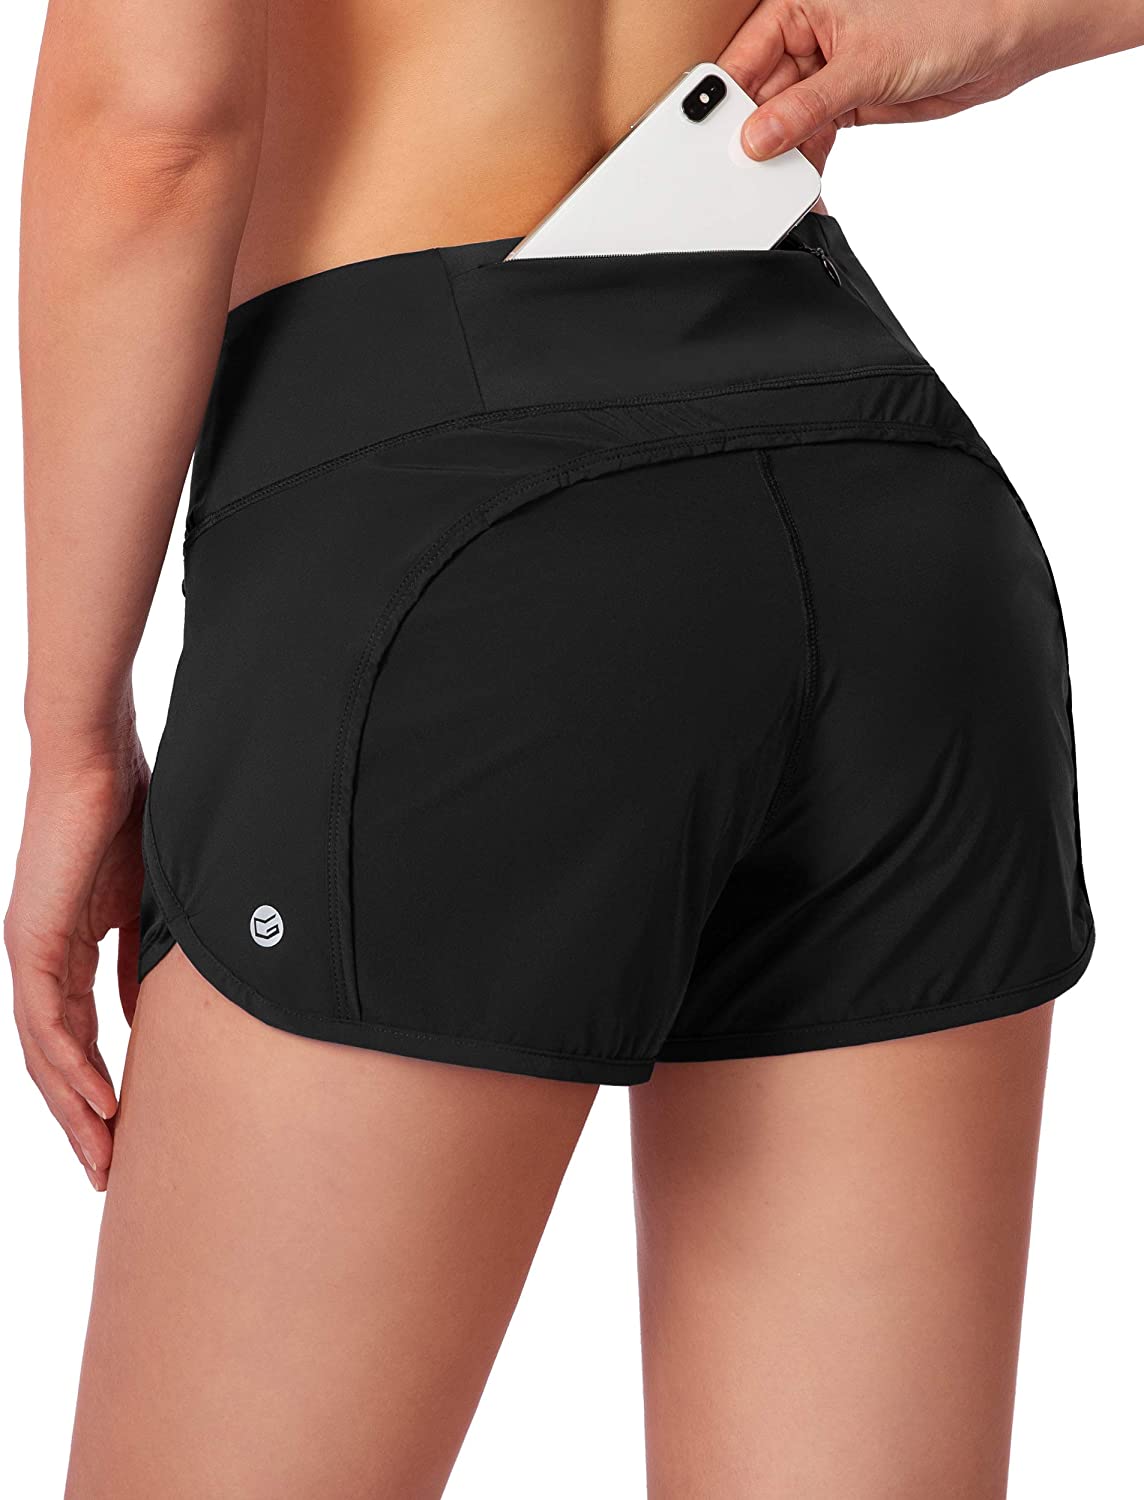 Lindanina Workout Running Shorts for Women High Waist Athletic Sports Shorts 2 in 1 with Zipper Back Pocket